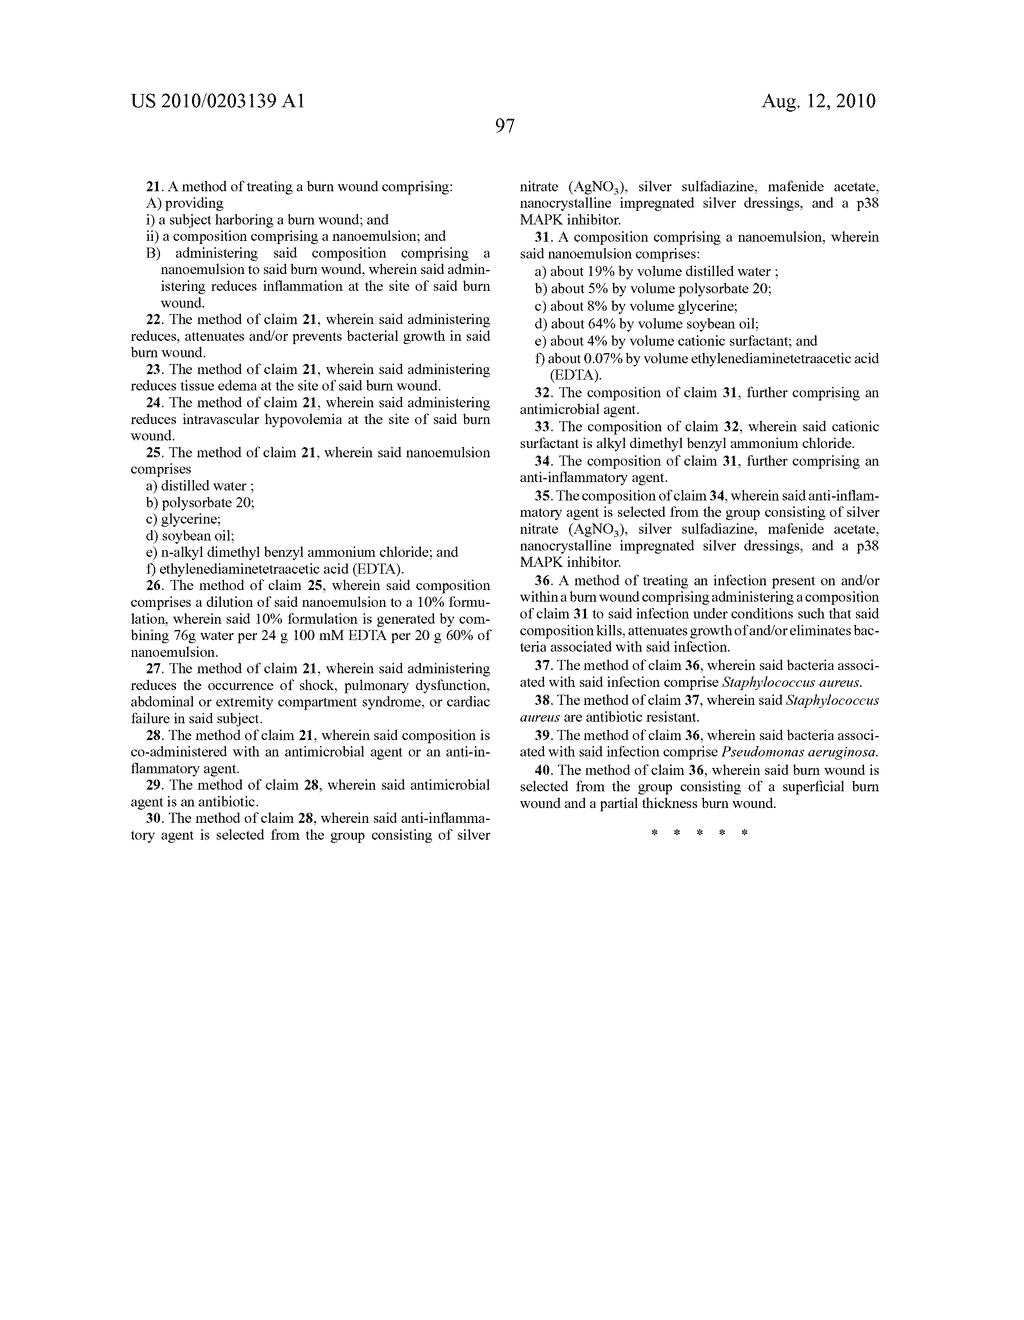 NANOEMULSION THERAPEUTIC COMPOSITIONS AND METHODS OF USING THE SAME - diagram, schematic, and image 137